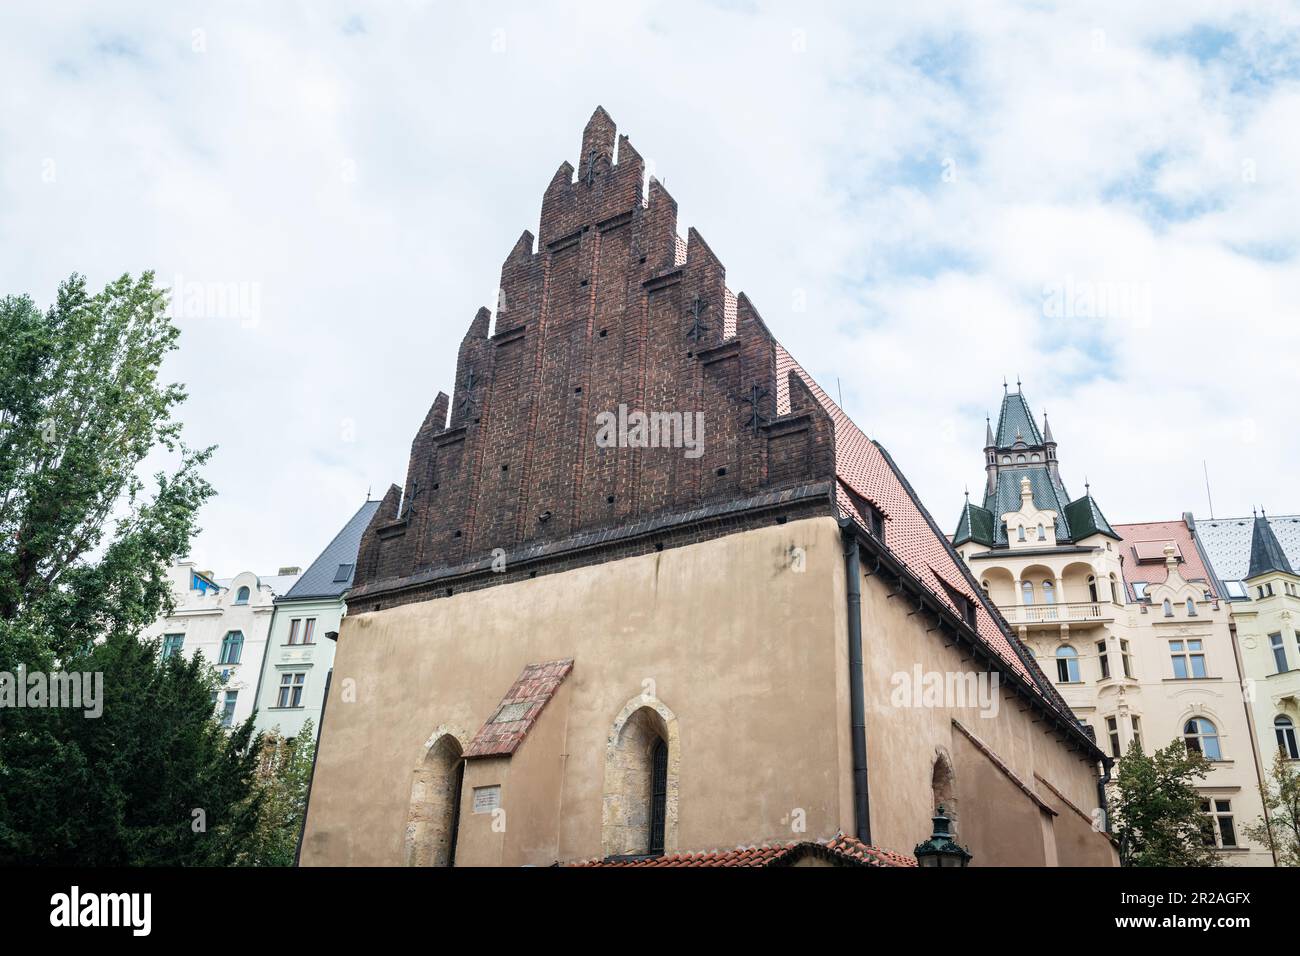 Low-angle view of the Old New Synagogue (Staronova synagoga) in Pragues Jewish quarter, Czech Republic. Stock Photo